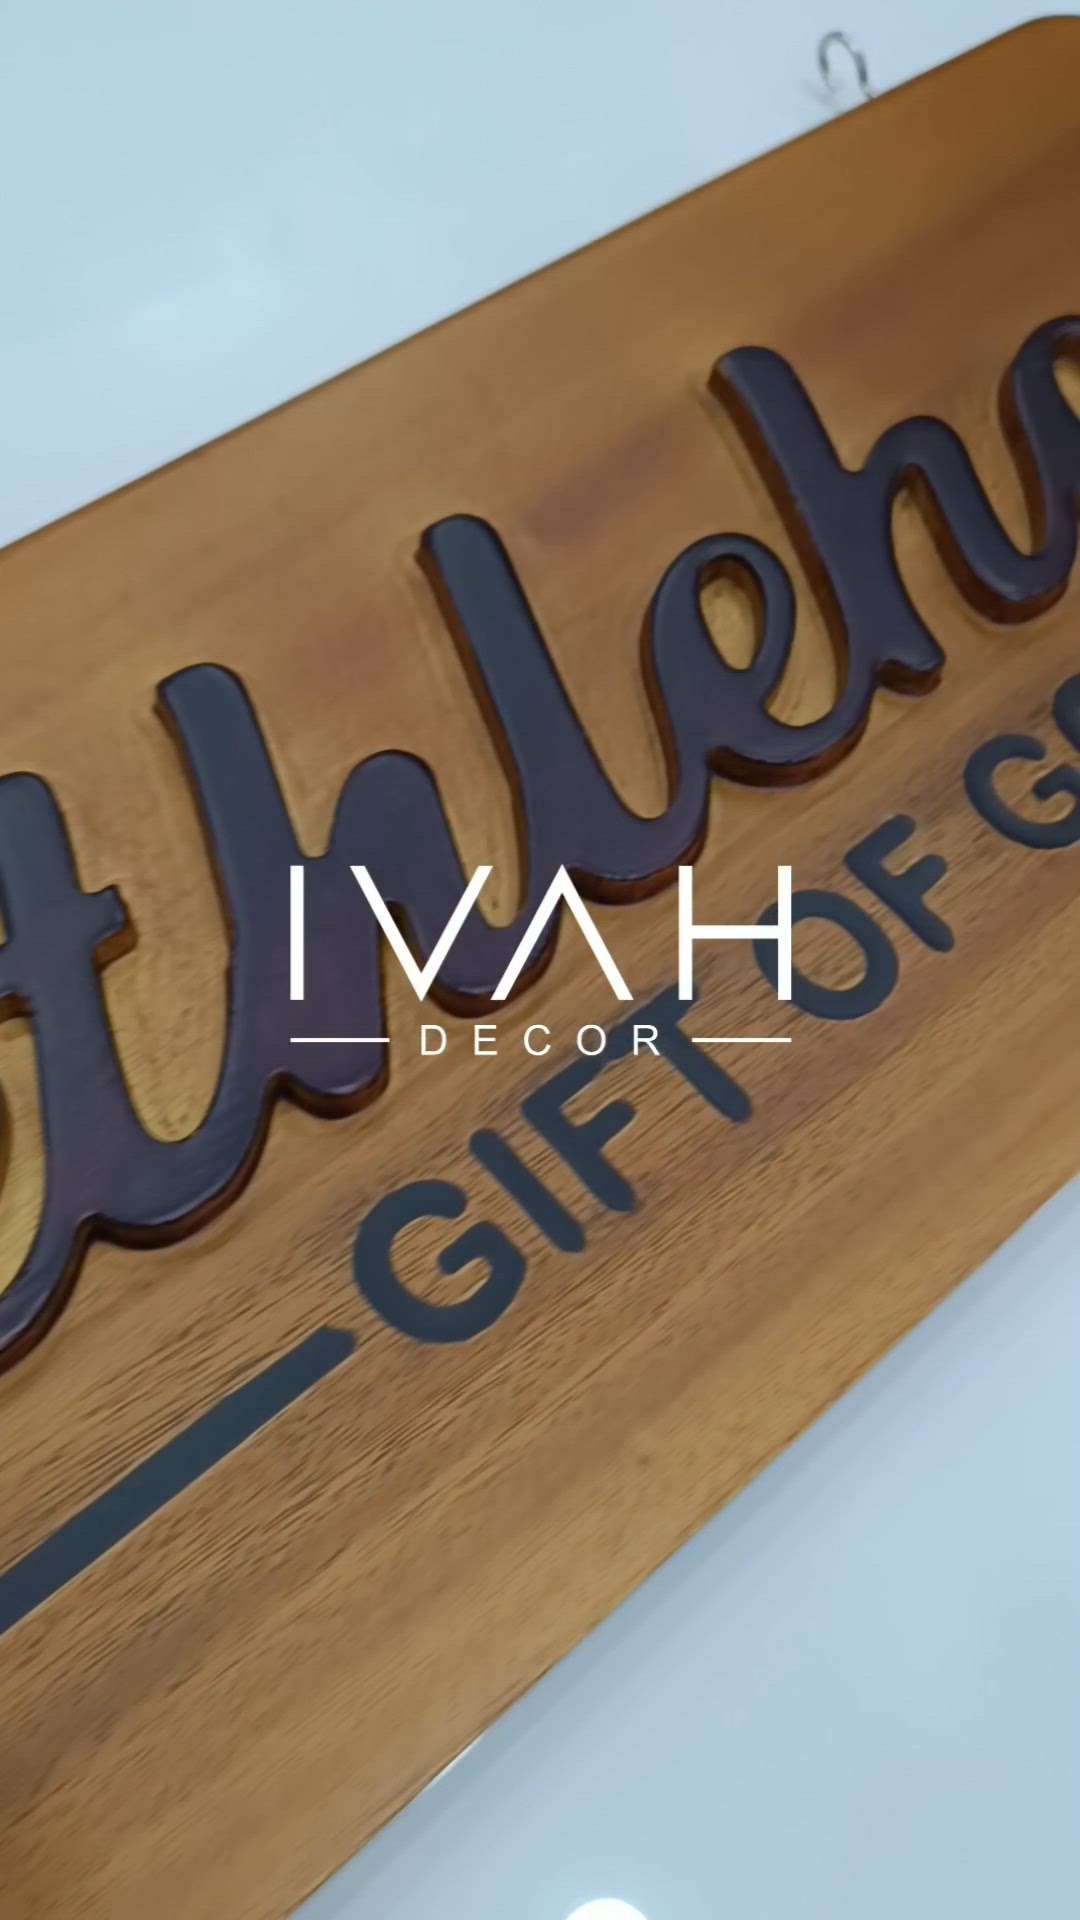 Wooden House Name Board | House Name plate Design | Wood carving House Name Plate | IVAH Decor